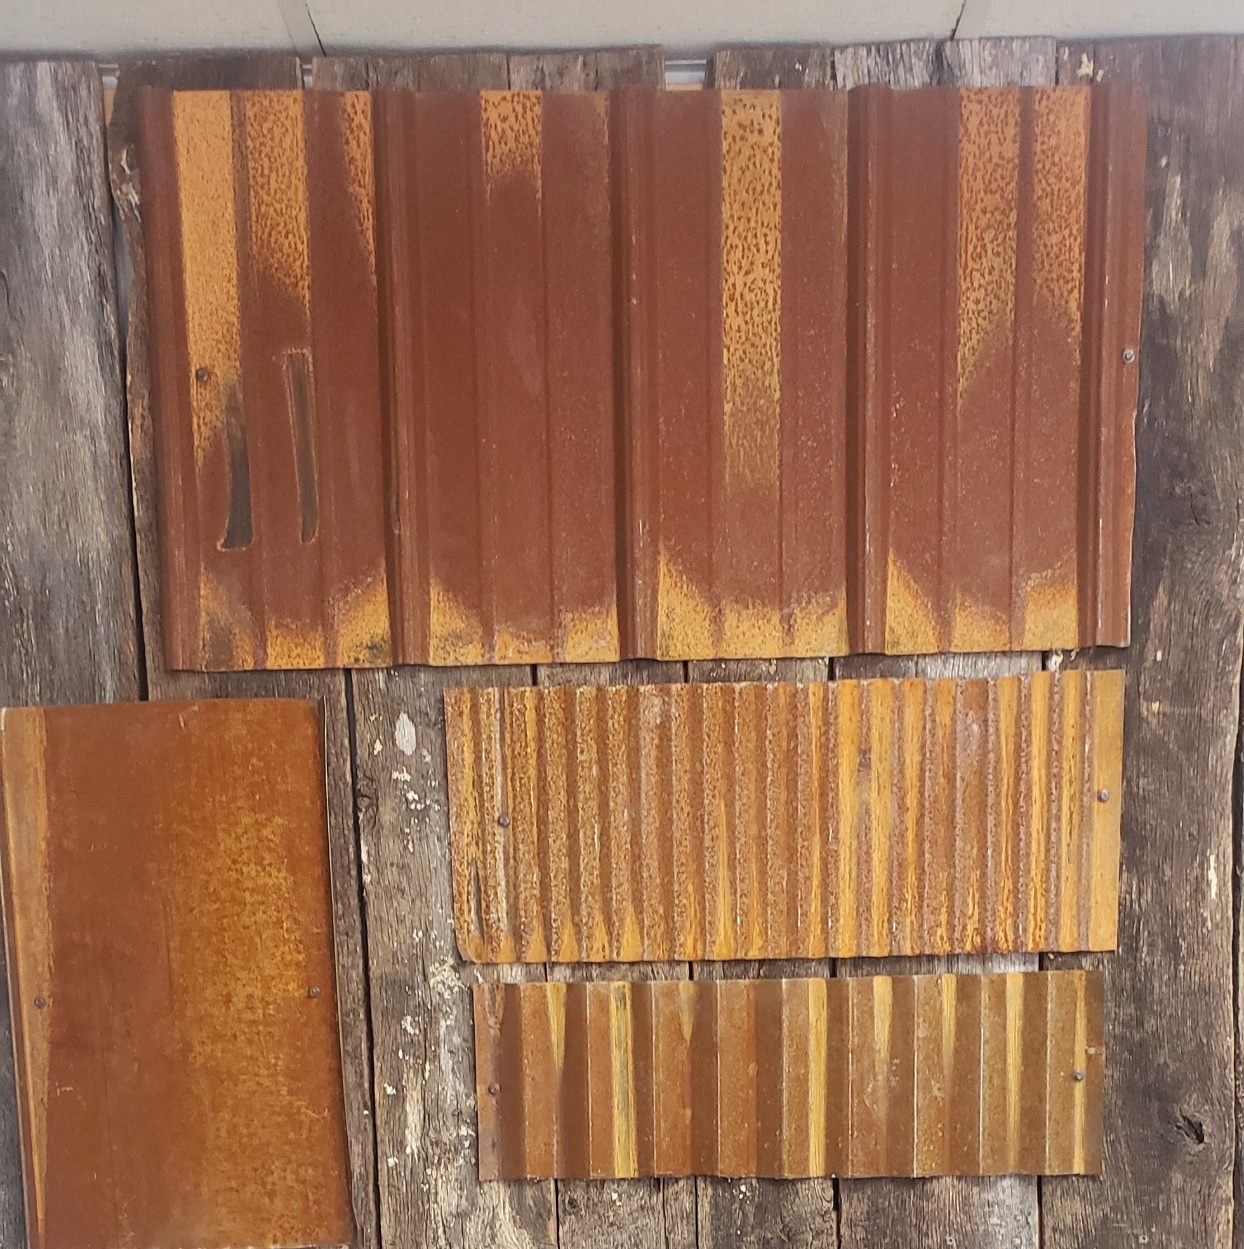 Commercial rusted panels 1 compressed